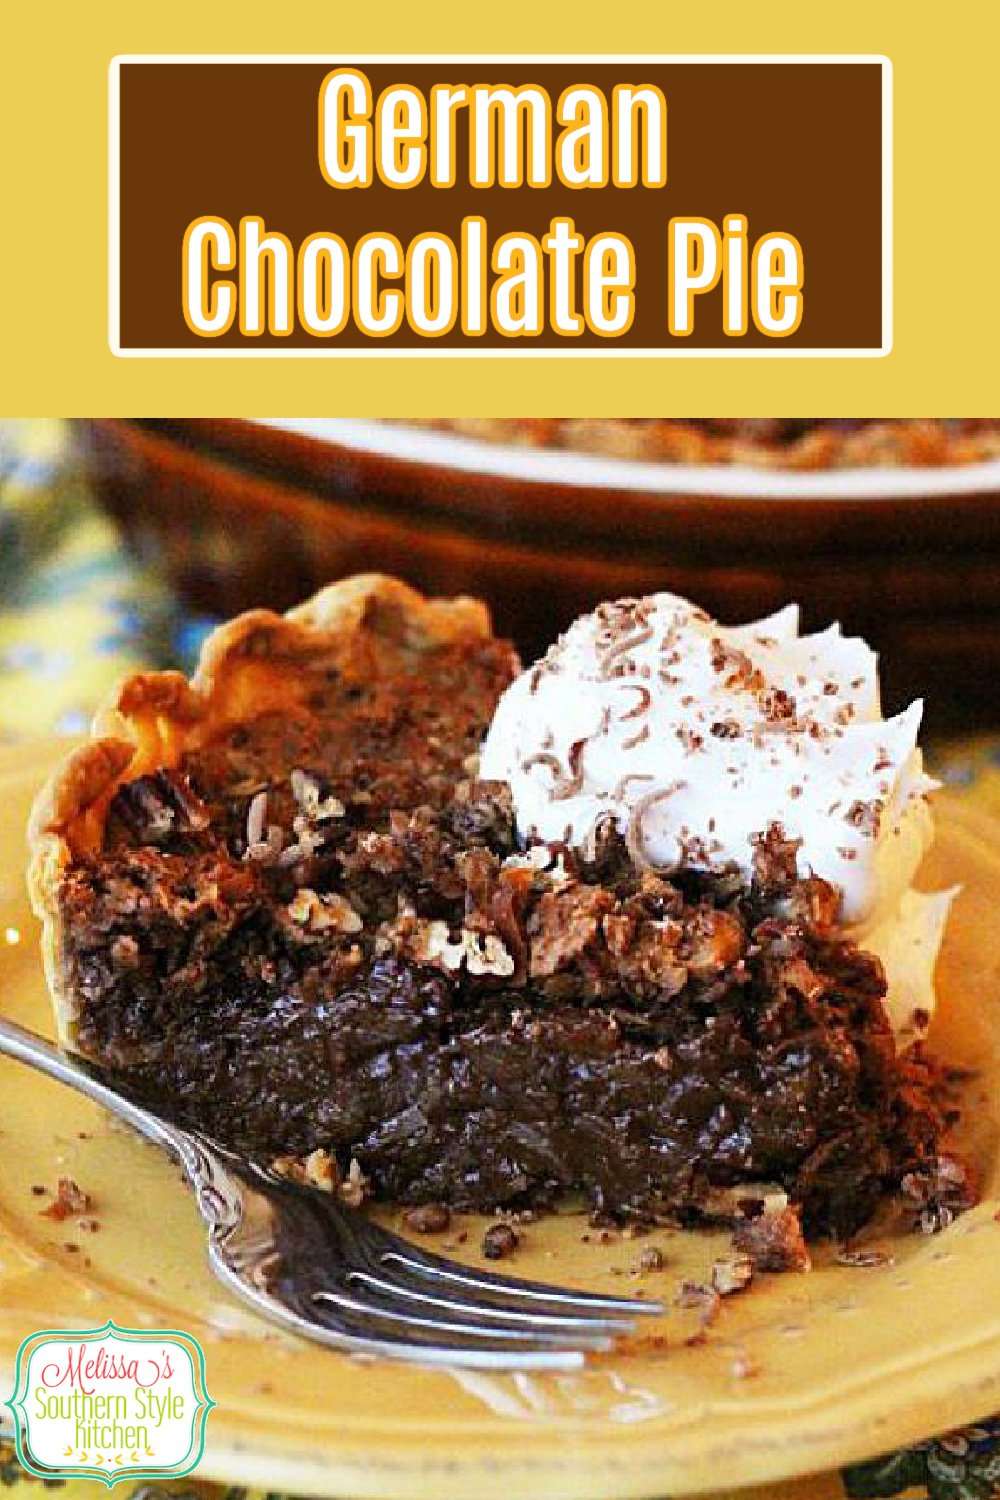 Prepare to fall in love with this German Chocolate Pie filled with velvety chocolate, shredded coconut and pecans #germanchocolatepie #chocolatepierecipes #germanchocolate #pie #desserts #dessertfoodrecipes #southernrecipes